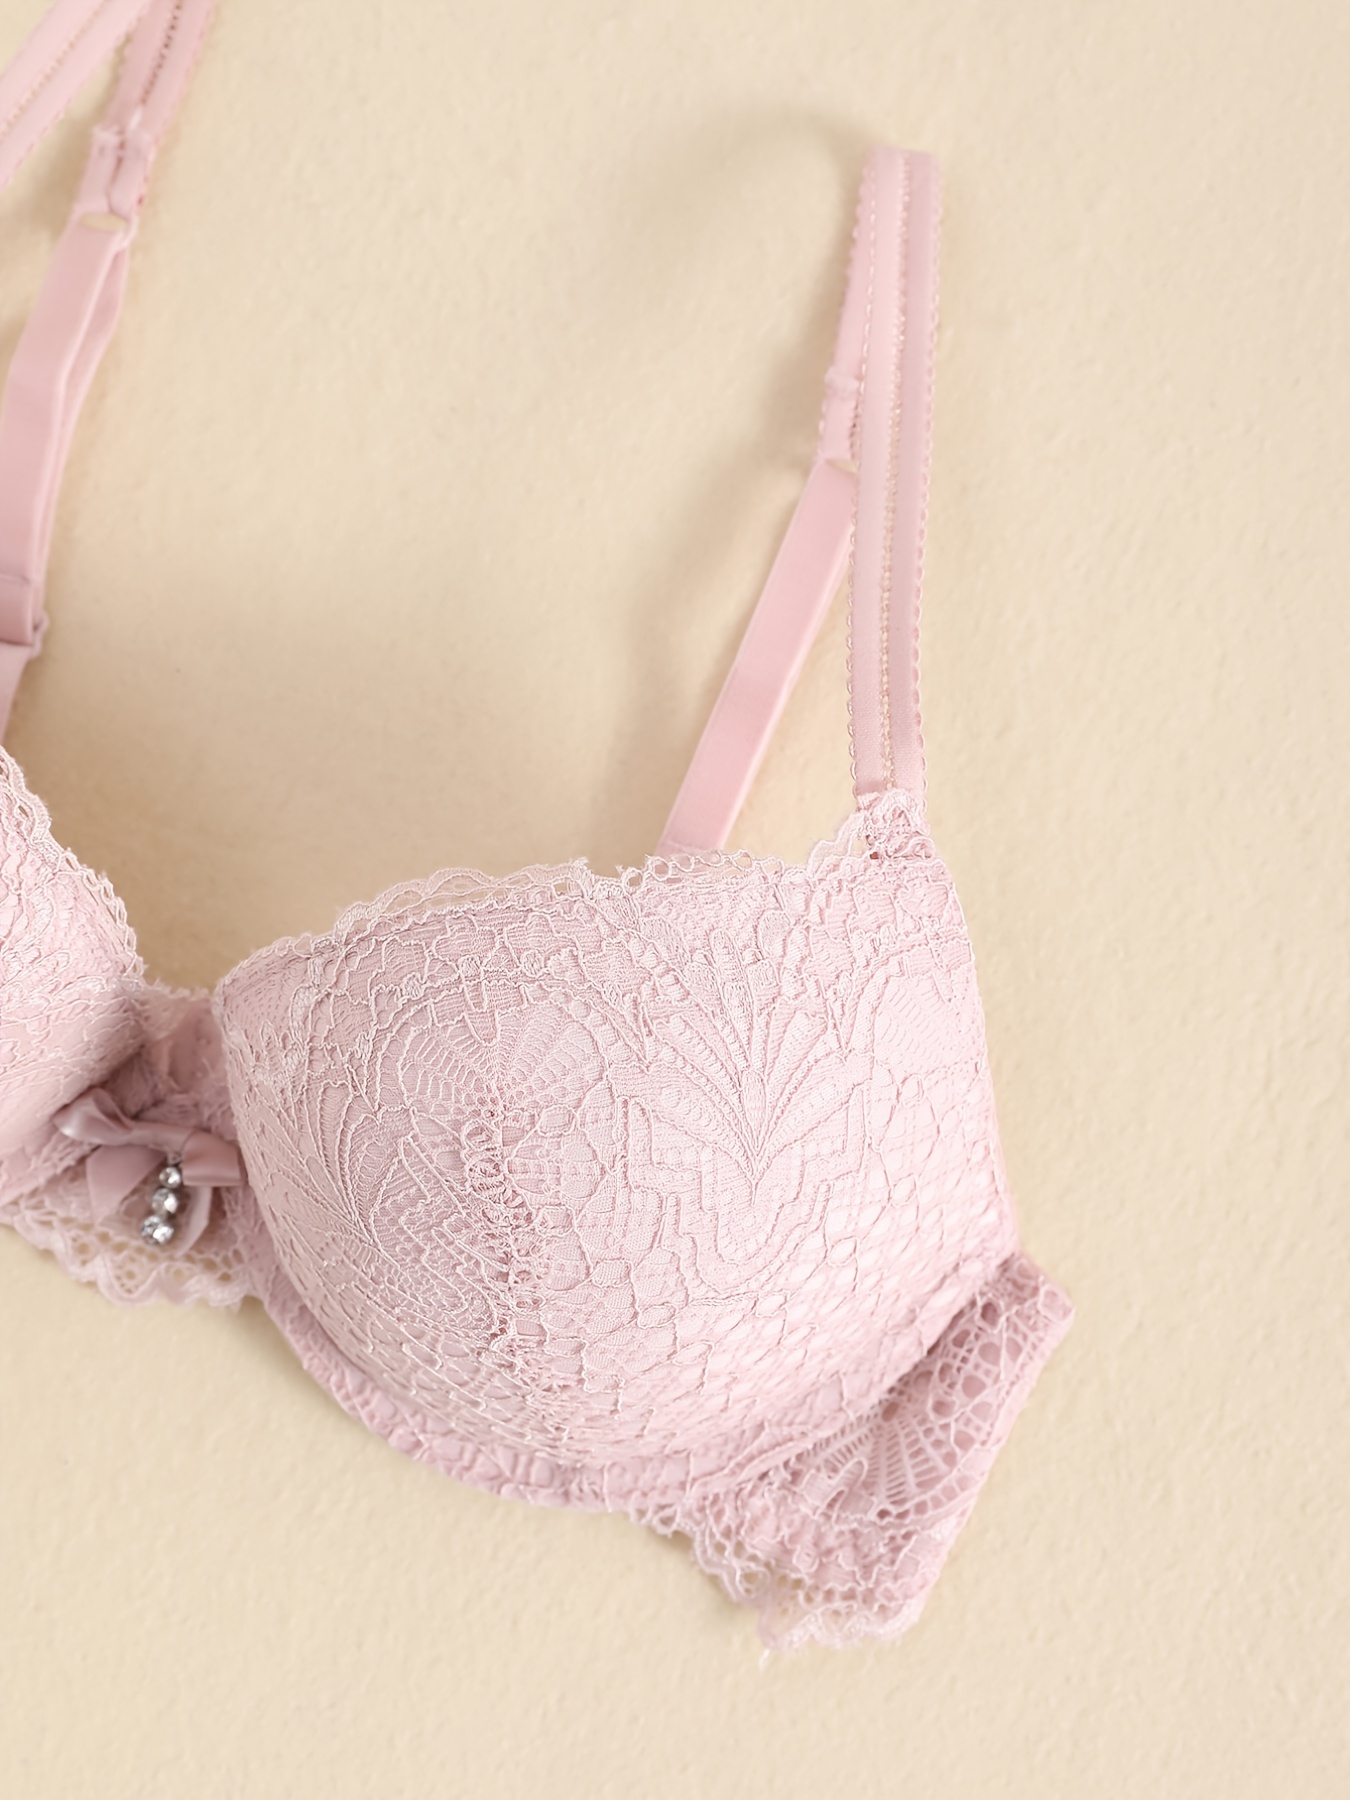 Pink lace on Cream underwire push-up Bra- satin bow detail - Size